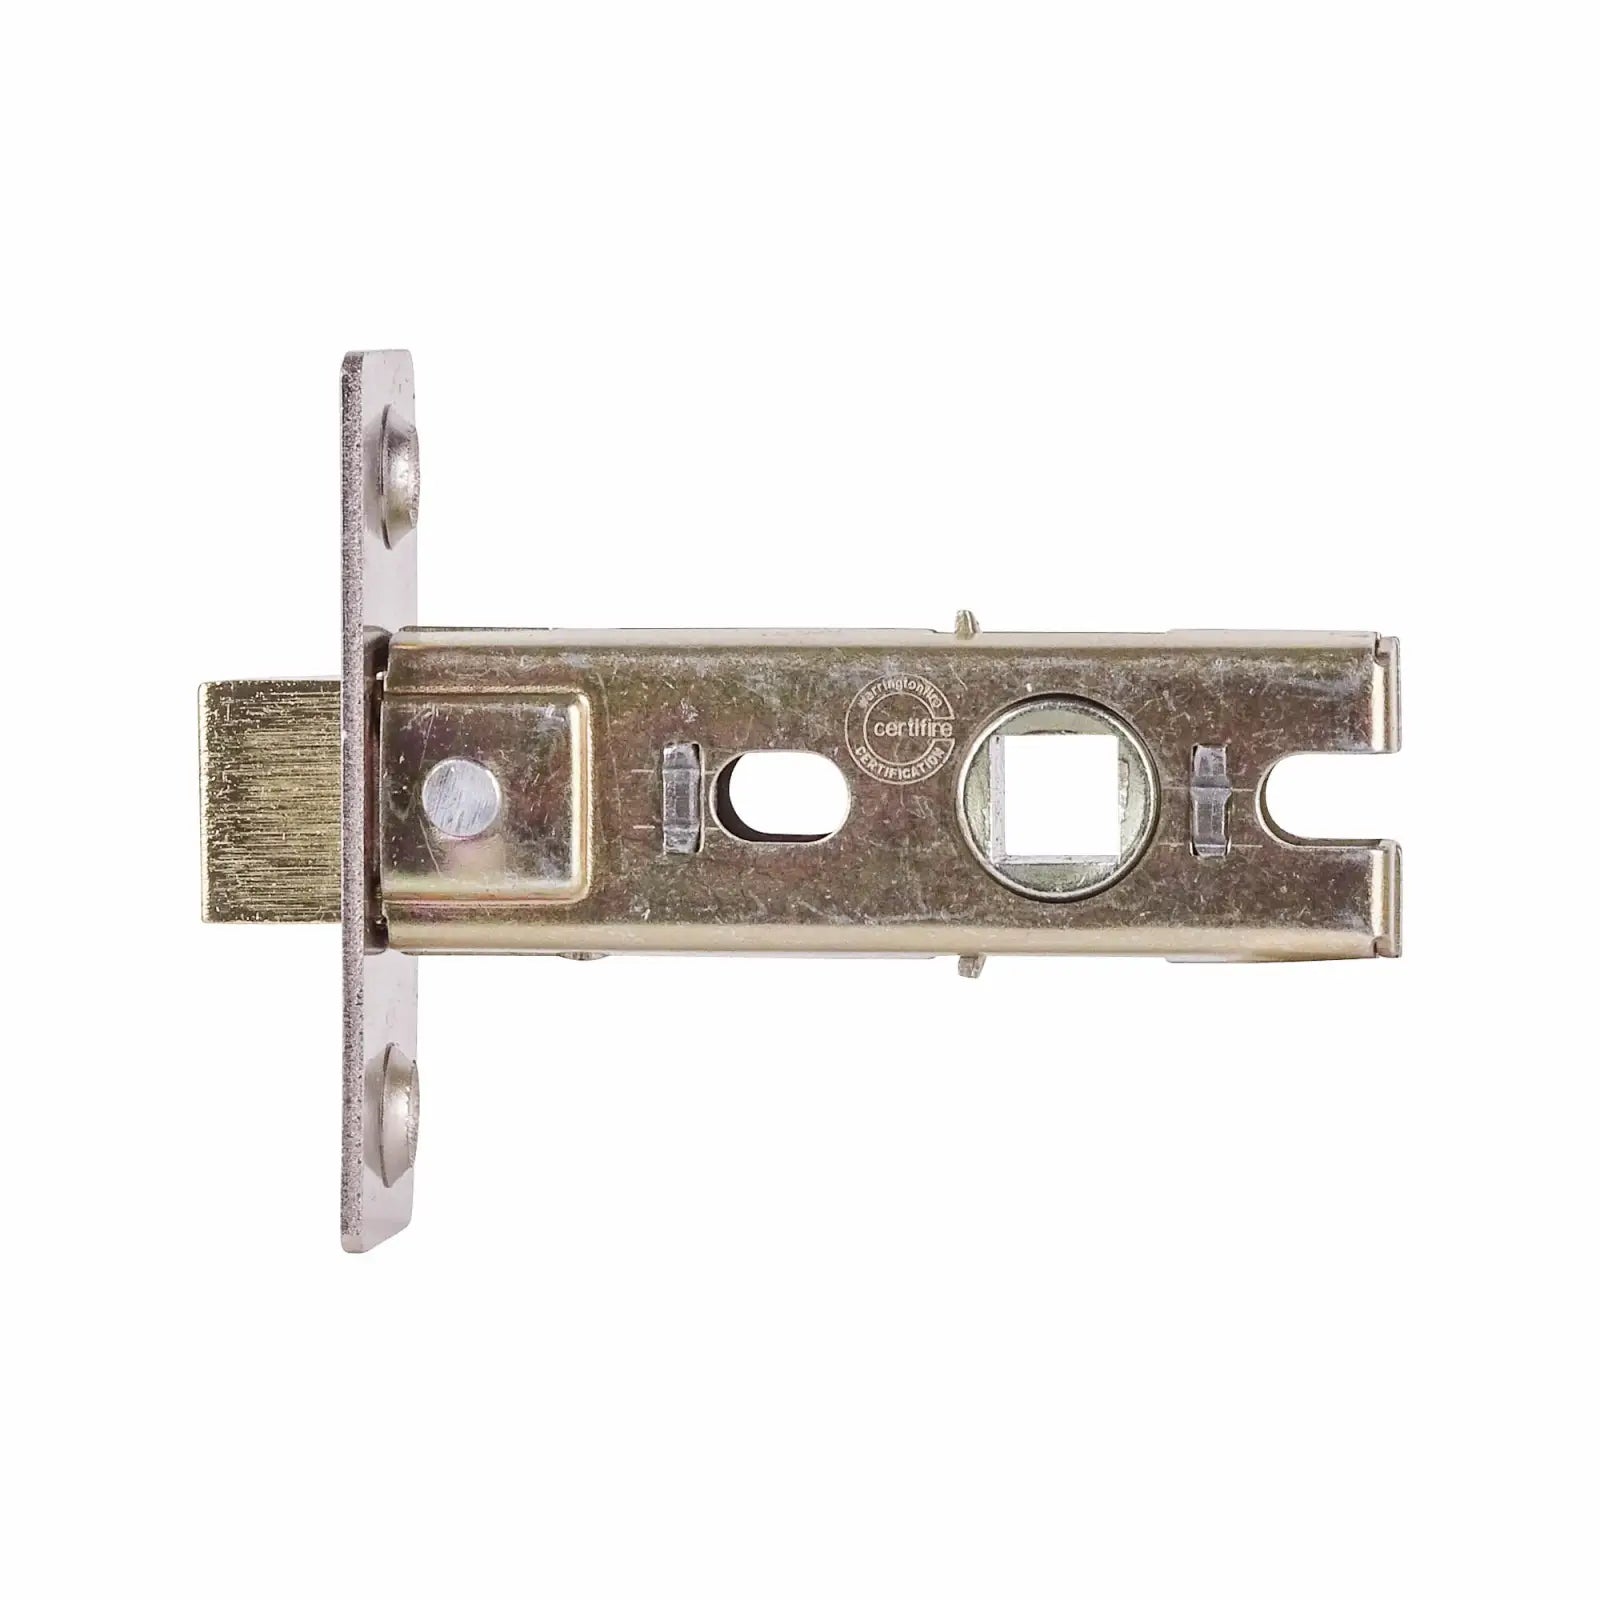 Fire Rated Tubular Mortice Latch - 64mm - Satin Nickel